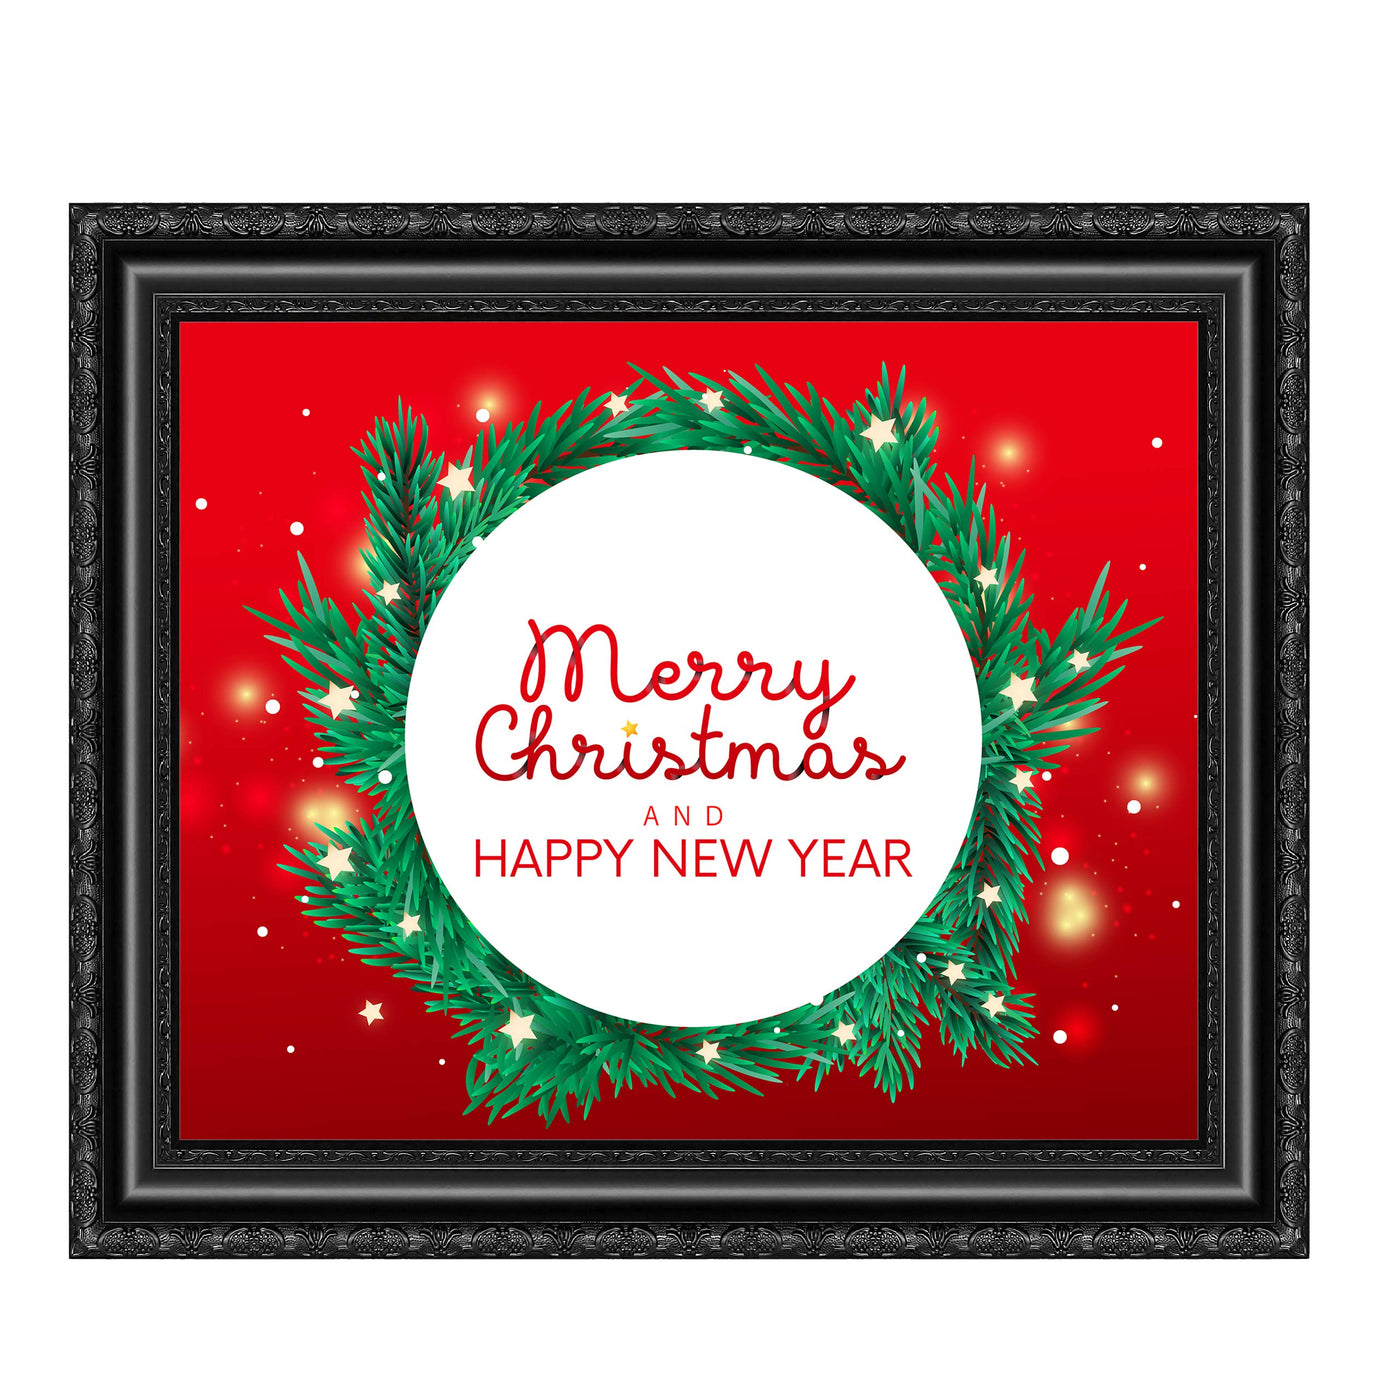 Merry Christmas & A Happy New Year Holiday Decor Wall Art -10 x 8" Modern Christmas Wreath Art Print-Ready to Frame. Festive Home-Kitchen-Farmhouse Decor. Perfect Welcome Sign-Winter Decoration!